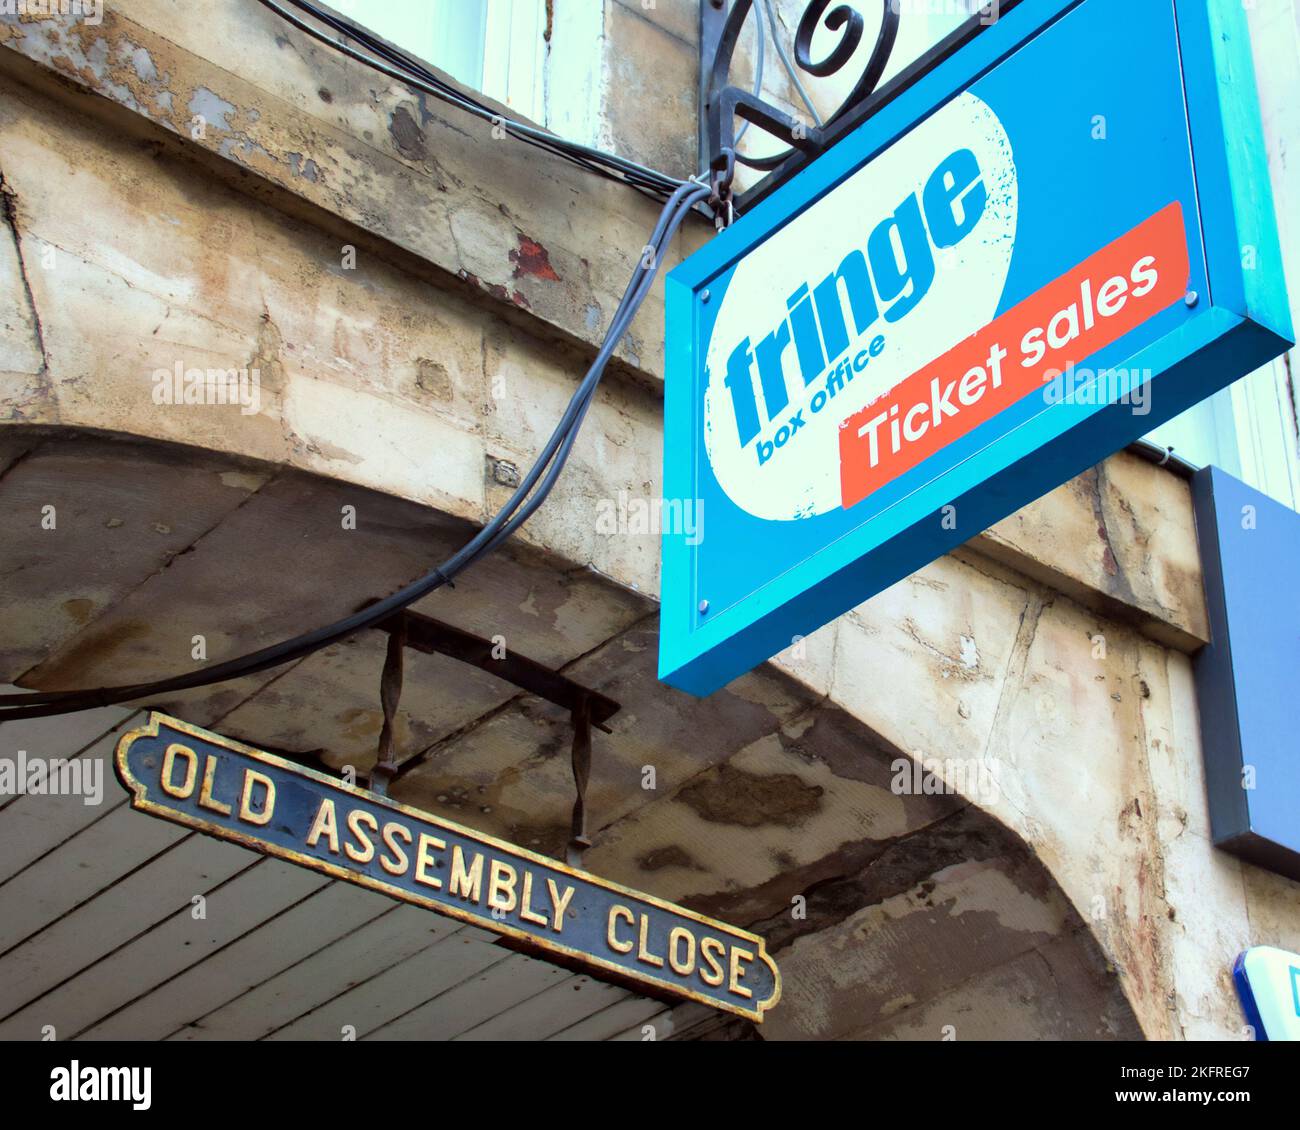 Edinburgh Fringe ticket office sign at old assembly close on the royal mile Stock Photo